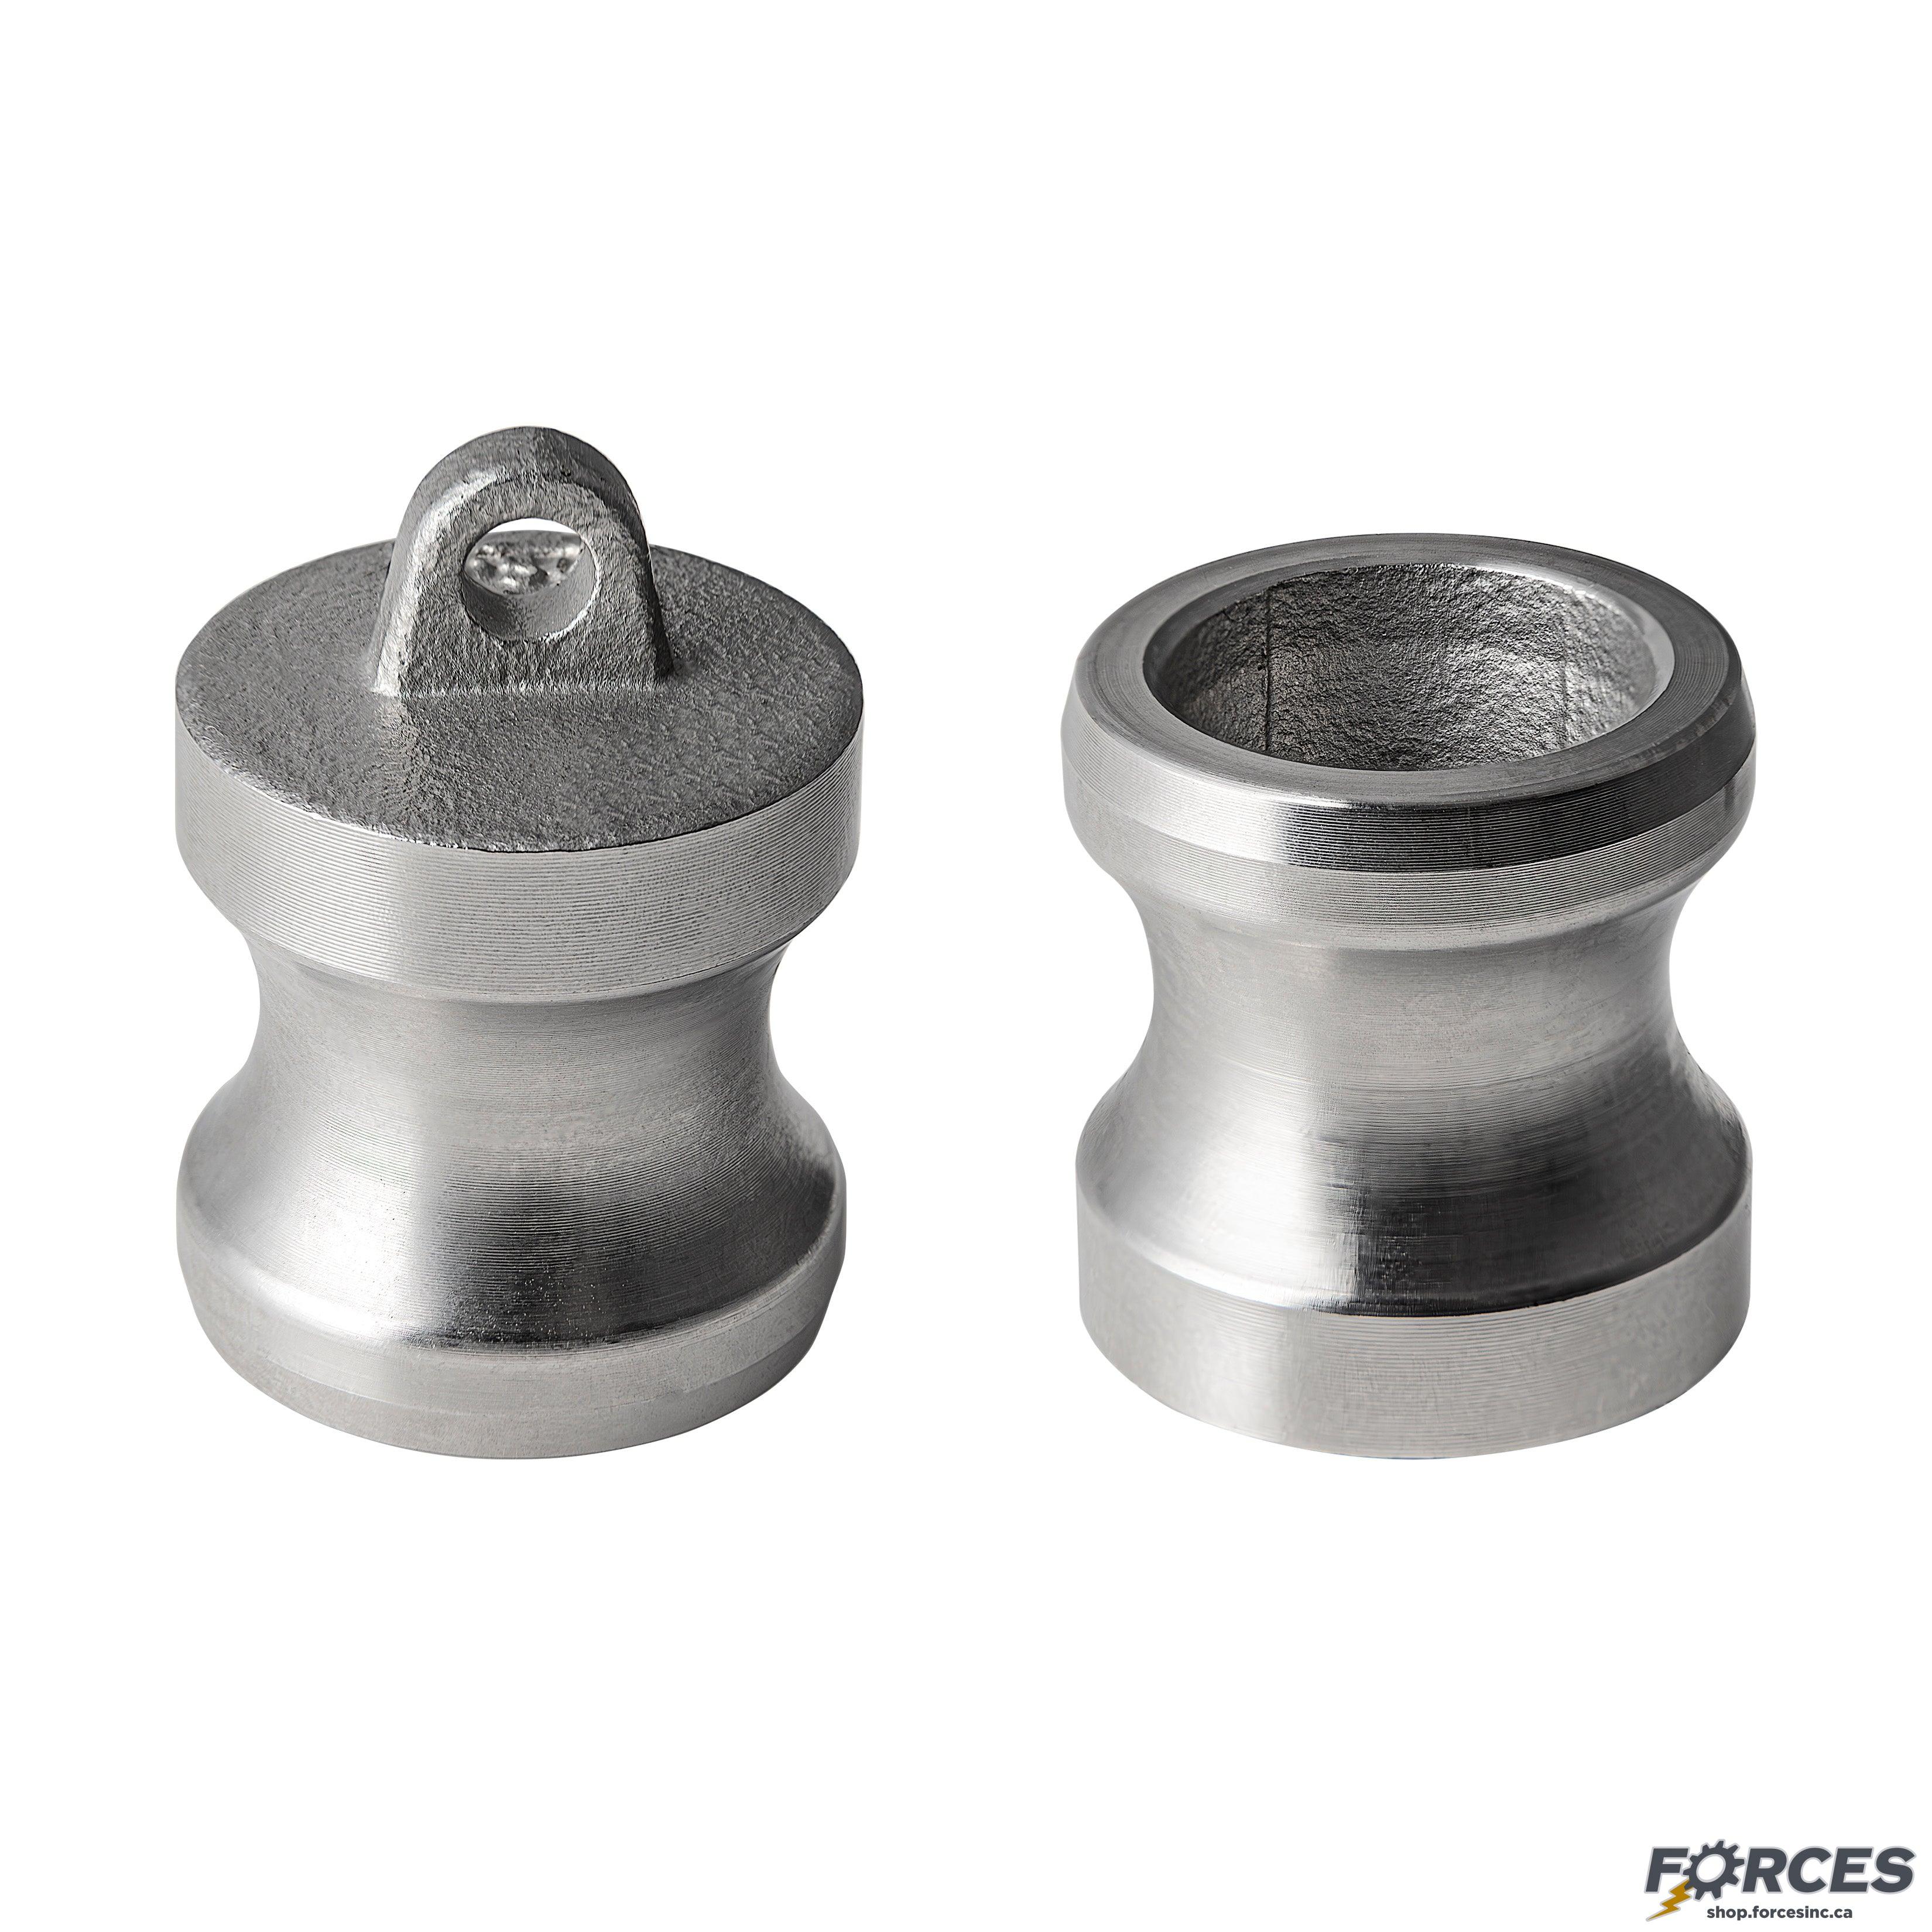 1/2" Type DP Camlock Fitting Stainless Steel 316 - Forces Inc